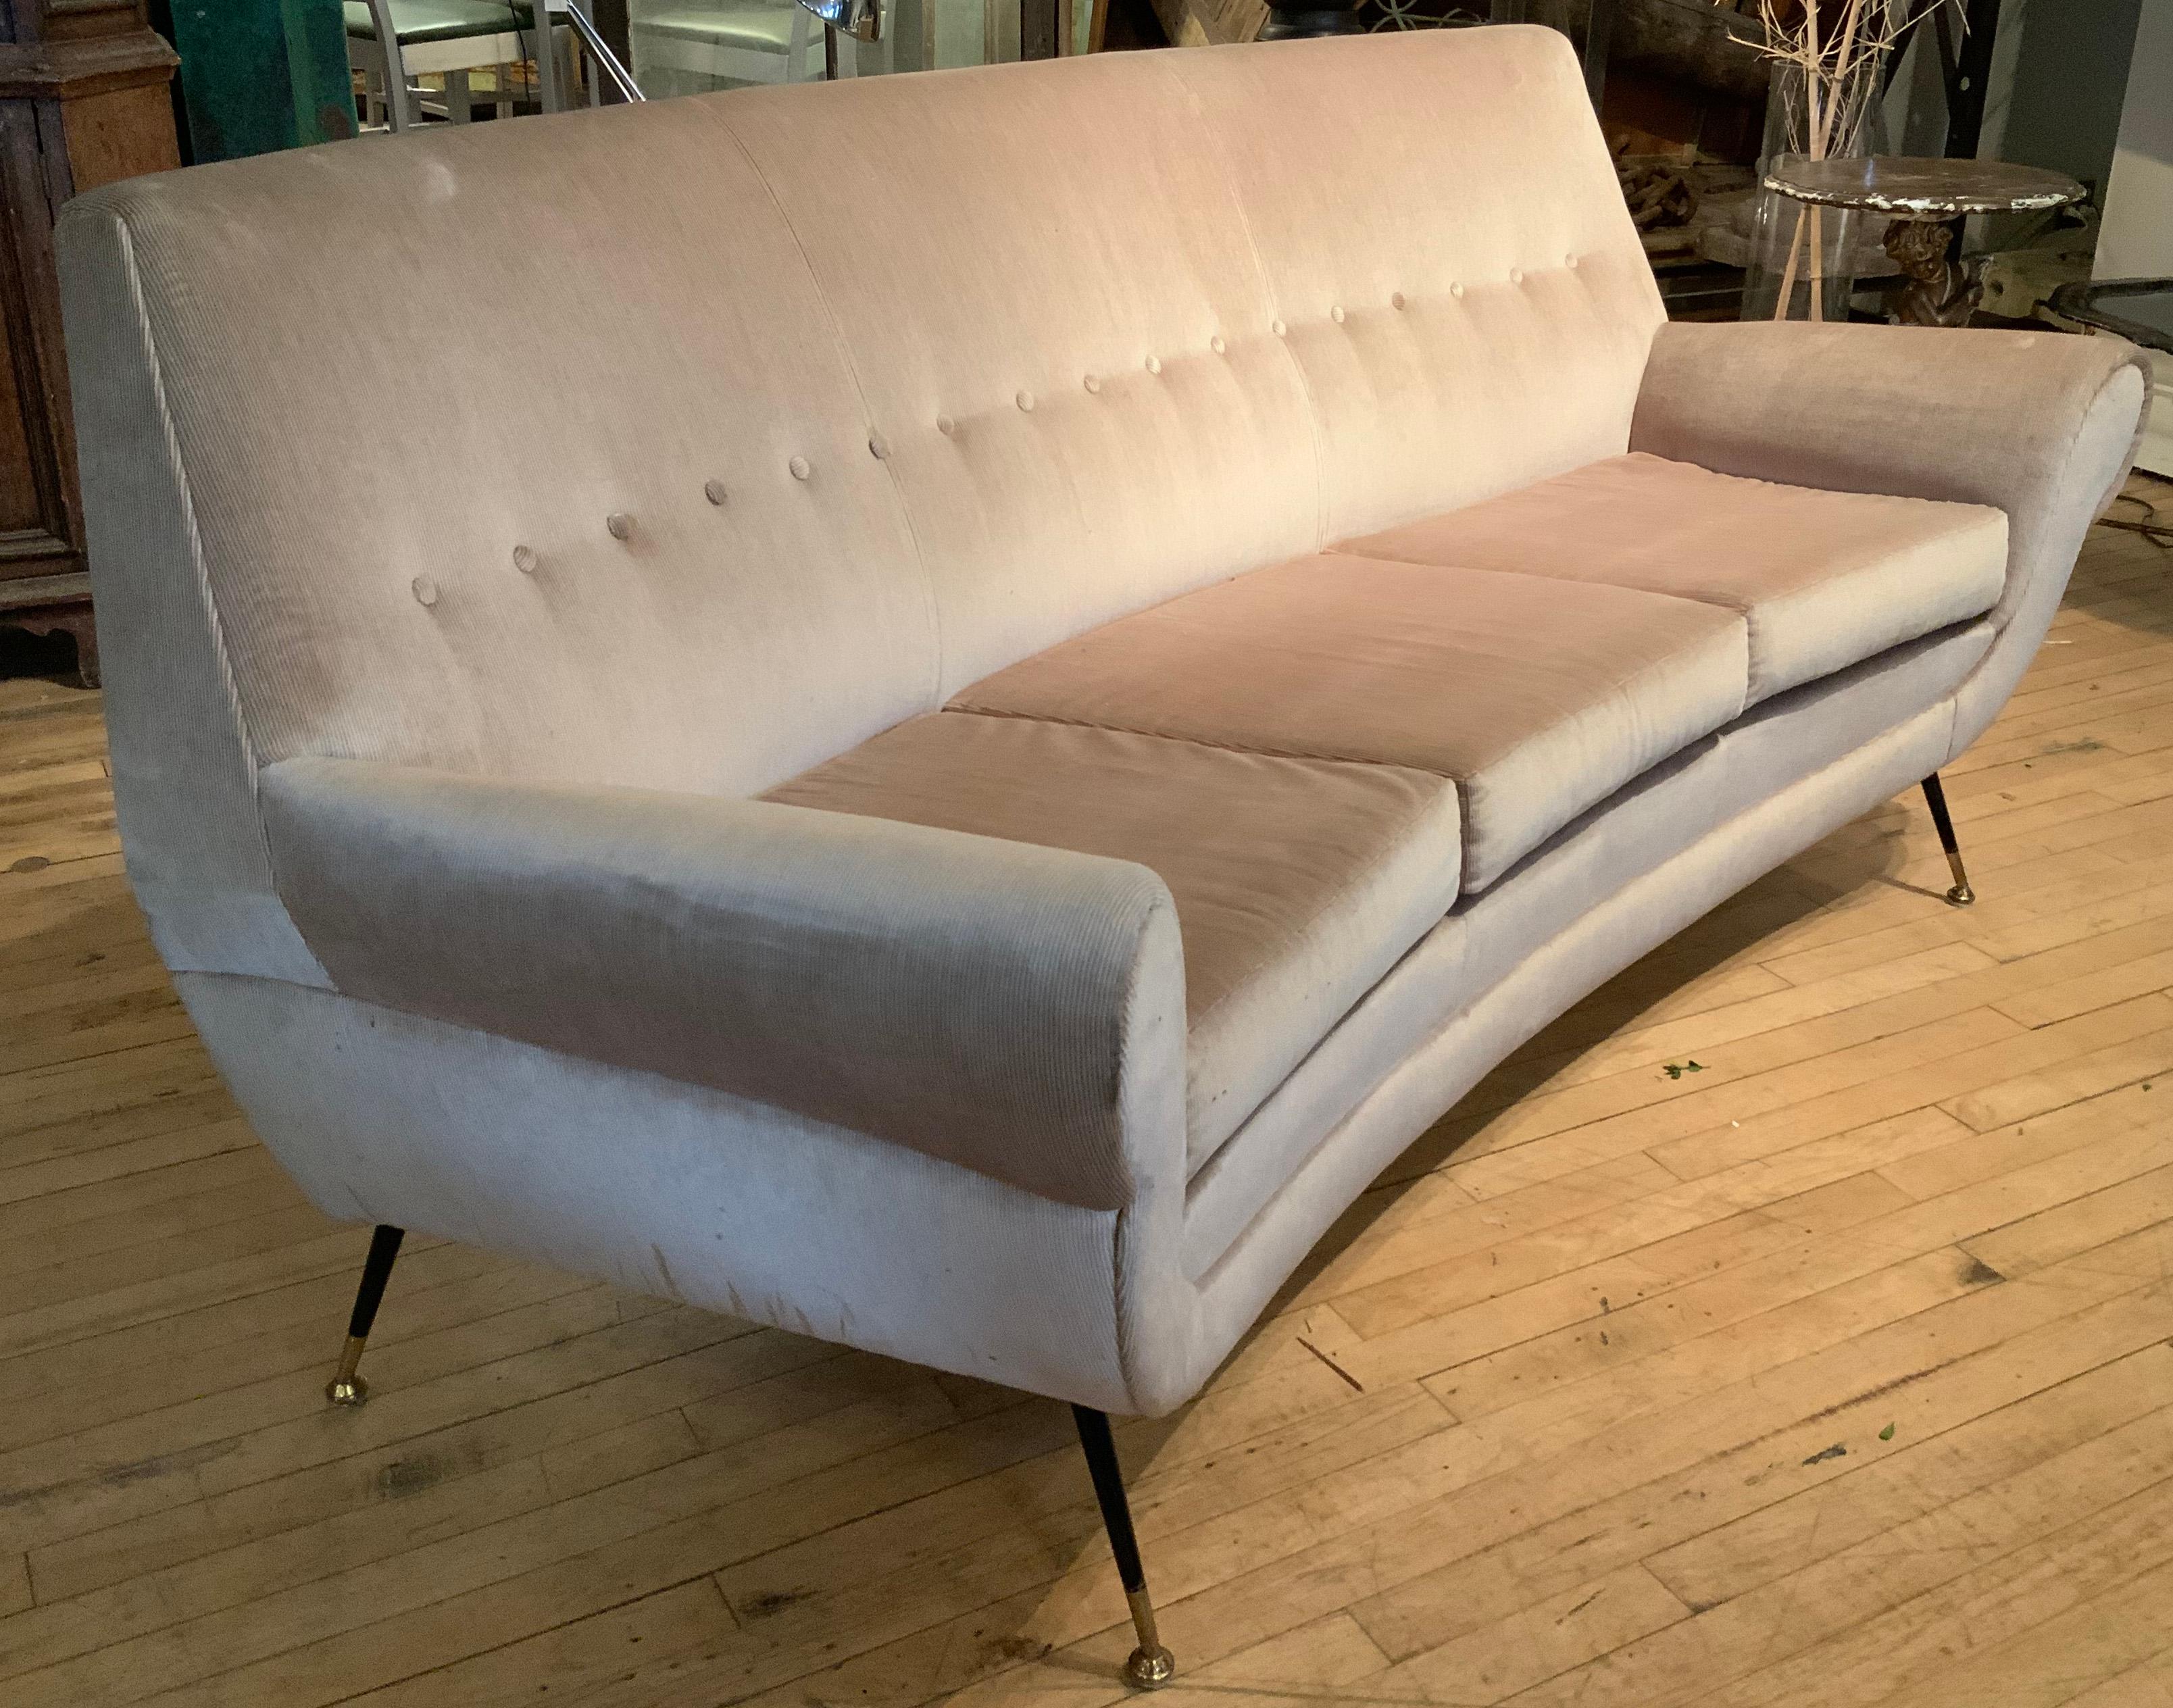 a very elegant and beautiful 1950's Italian sofa, with a slightly curved frame -- wonderful design and scale - perfect for a variety of settings. raised on tapered legs with brass caps and feet. in recent beige velvet/corduroy upholstery, which has